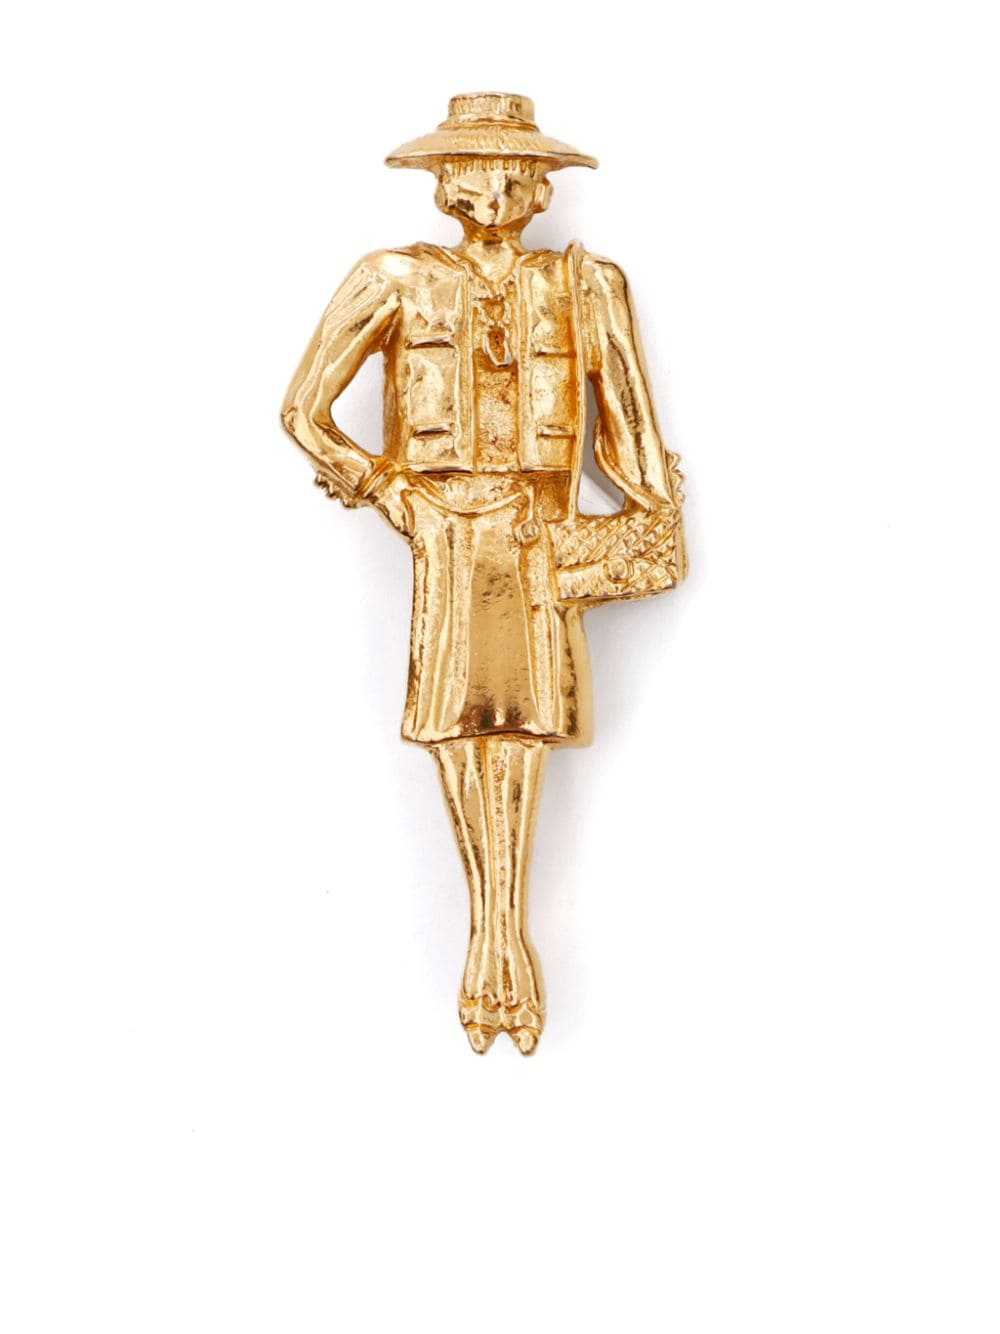 CHANEL Pre-Owned 1981-1985 Mademoiselle brooch - … - image 1